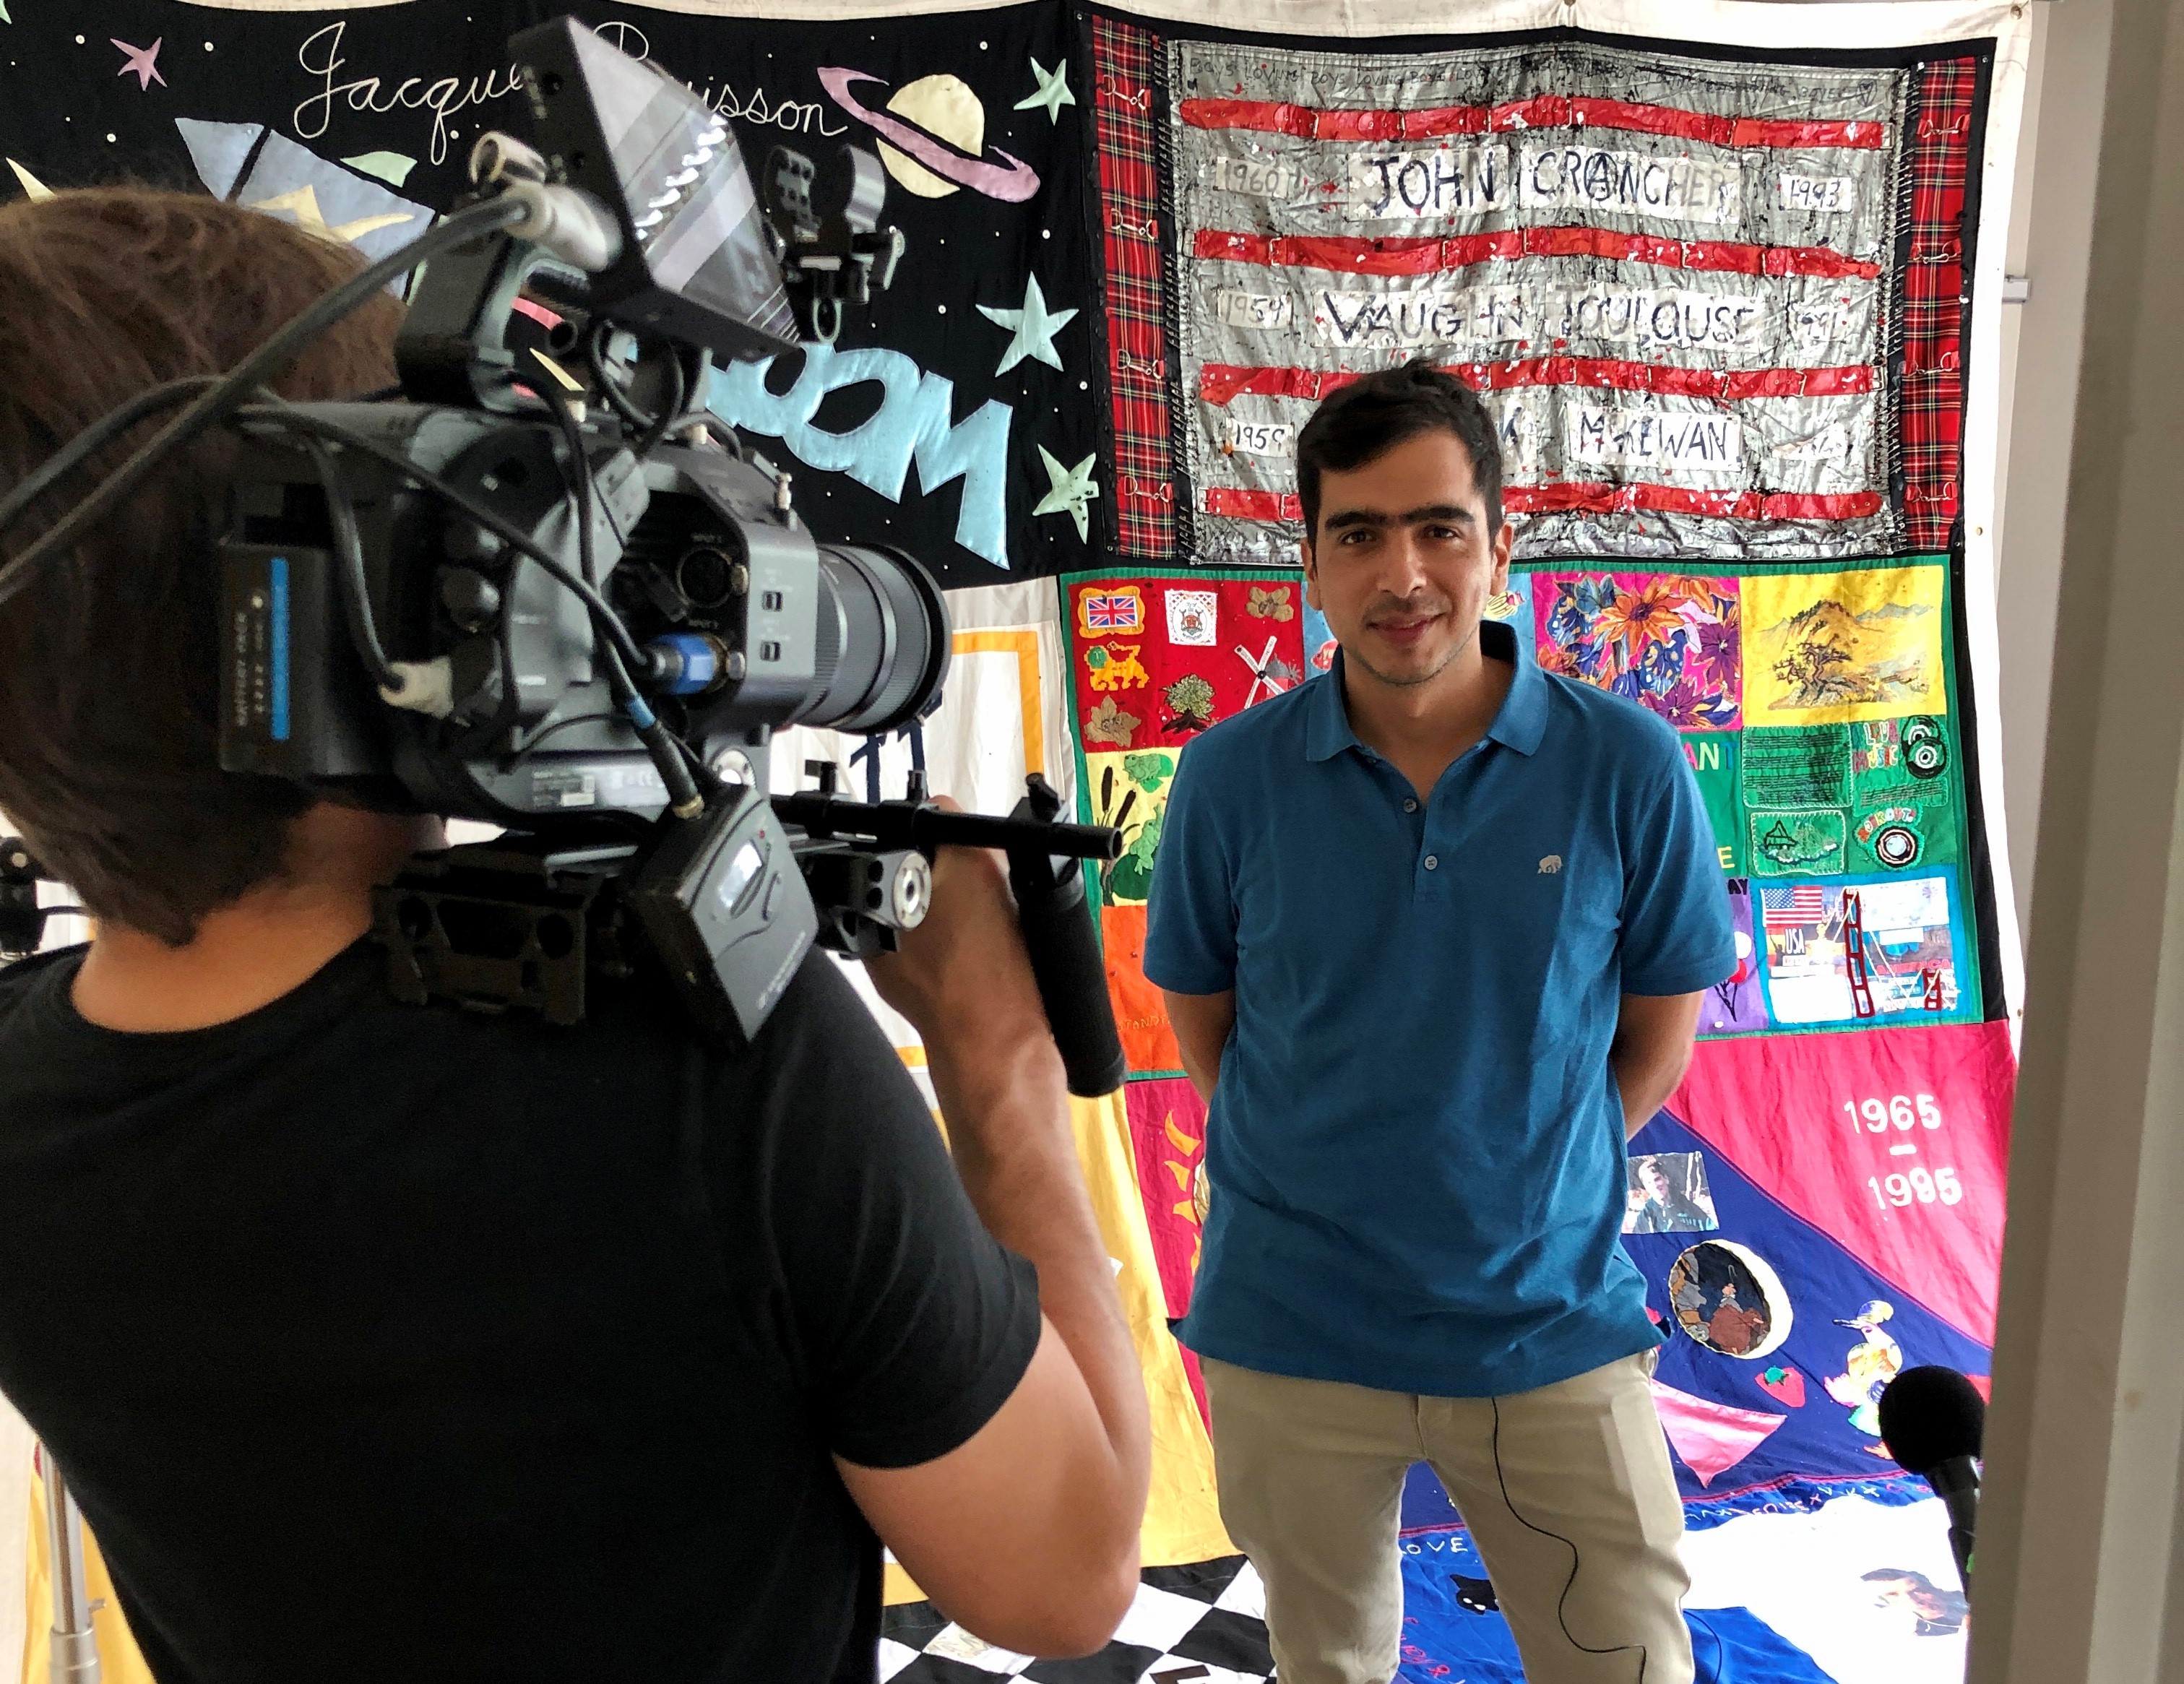 Jose of Fast Track Cities resenting to a video camera in front of a quilt